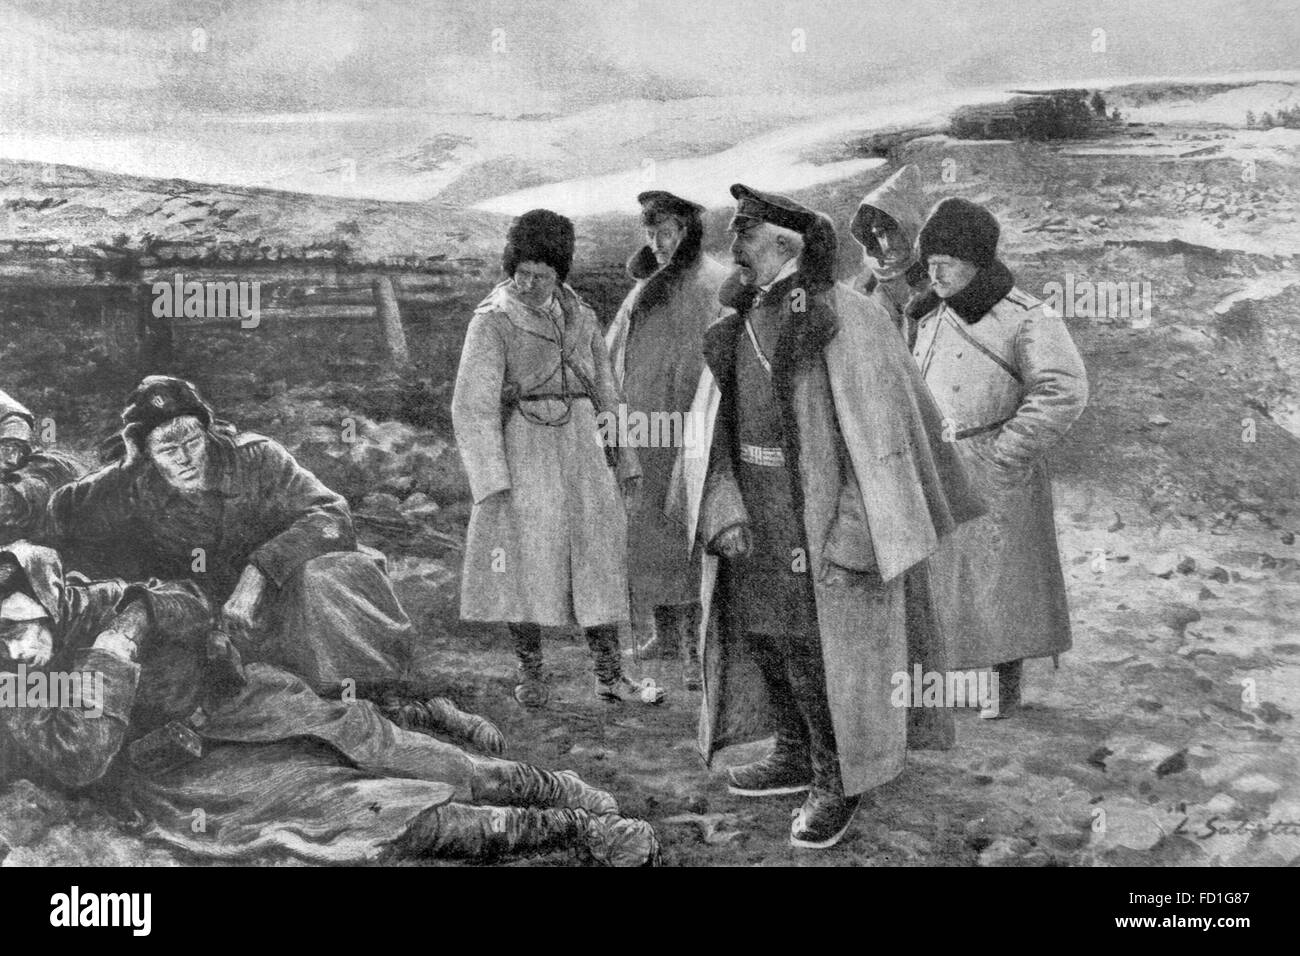 Russo-Japanese War (1904-1905). Last days of Port Arthur resistance. The Russian General Anatoly Stessel (1848-1915) visits the survivors of a combat of five days and five nights. Engraving by L. Sabattier.  'La Ilustración Artistica', 1905. Stock Photo